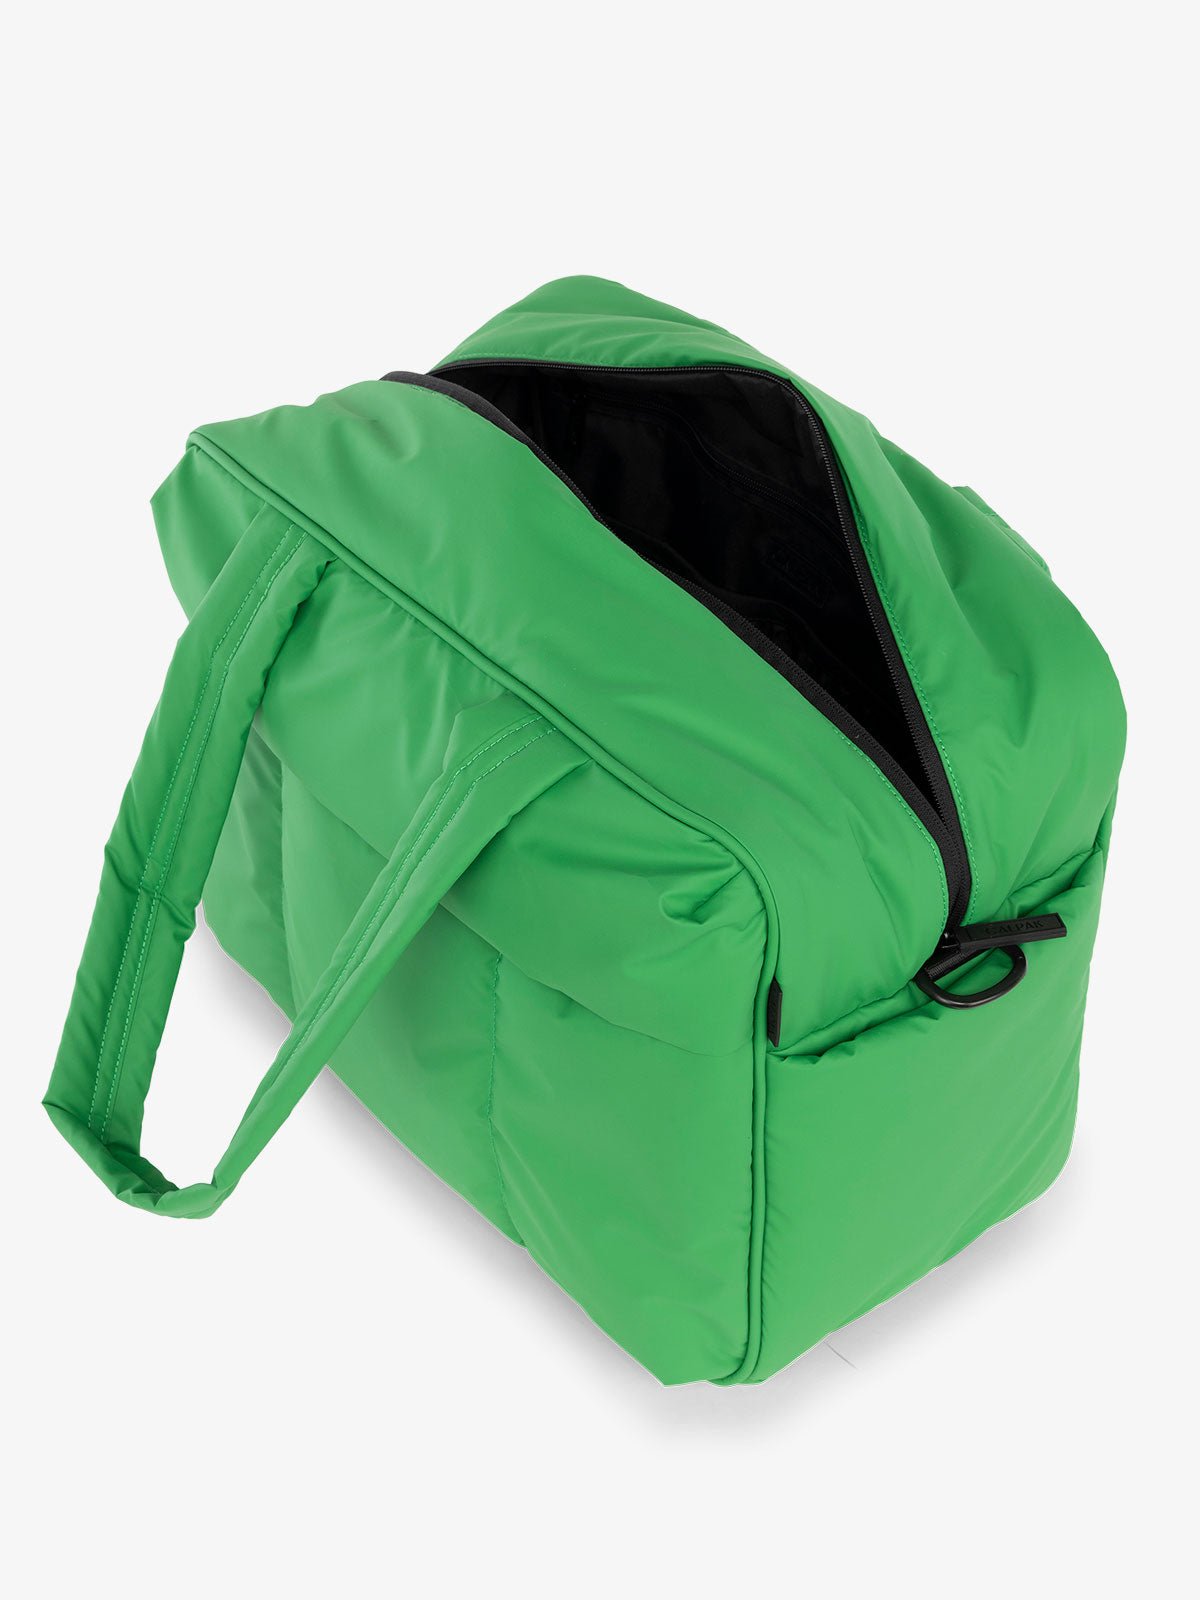 CALPAK Water Resistant Luka Duffle Bag with multiple pockets and top handles in green